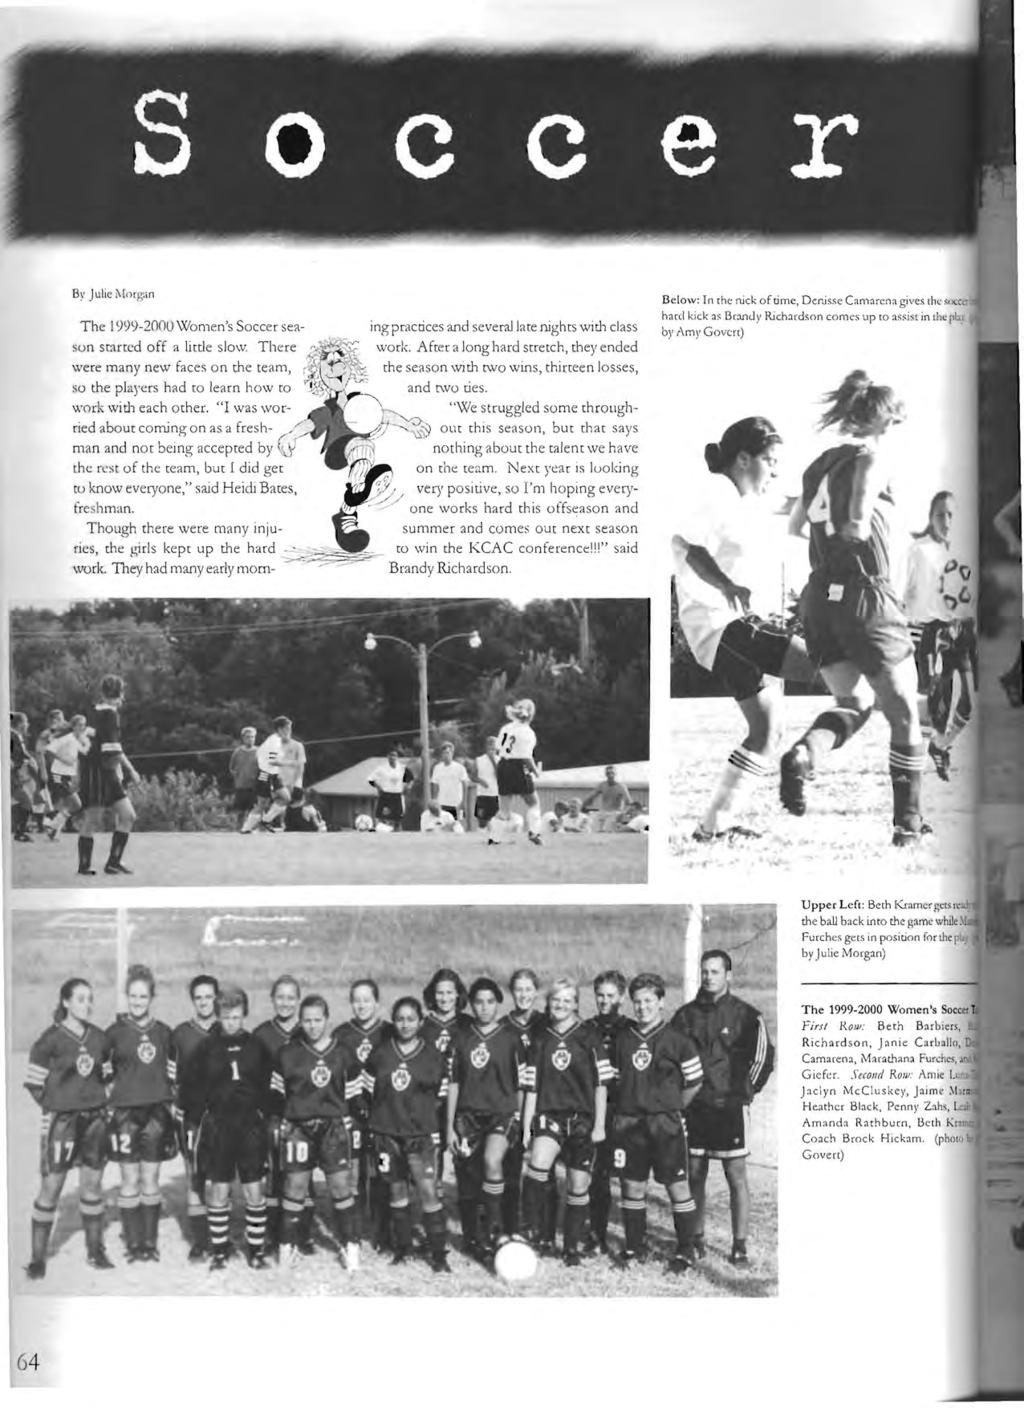 The 999-2ililO Women's Soccer season starred off a titde slow. There were many new faces o n the team, so the players had to learn how to work with each other.